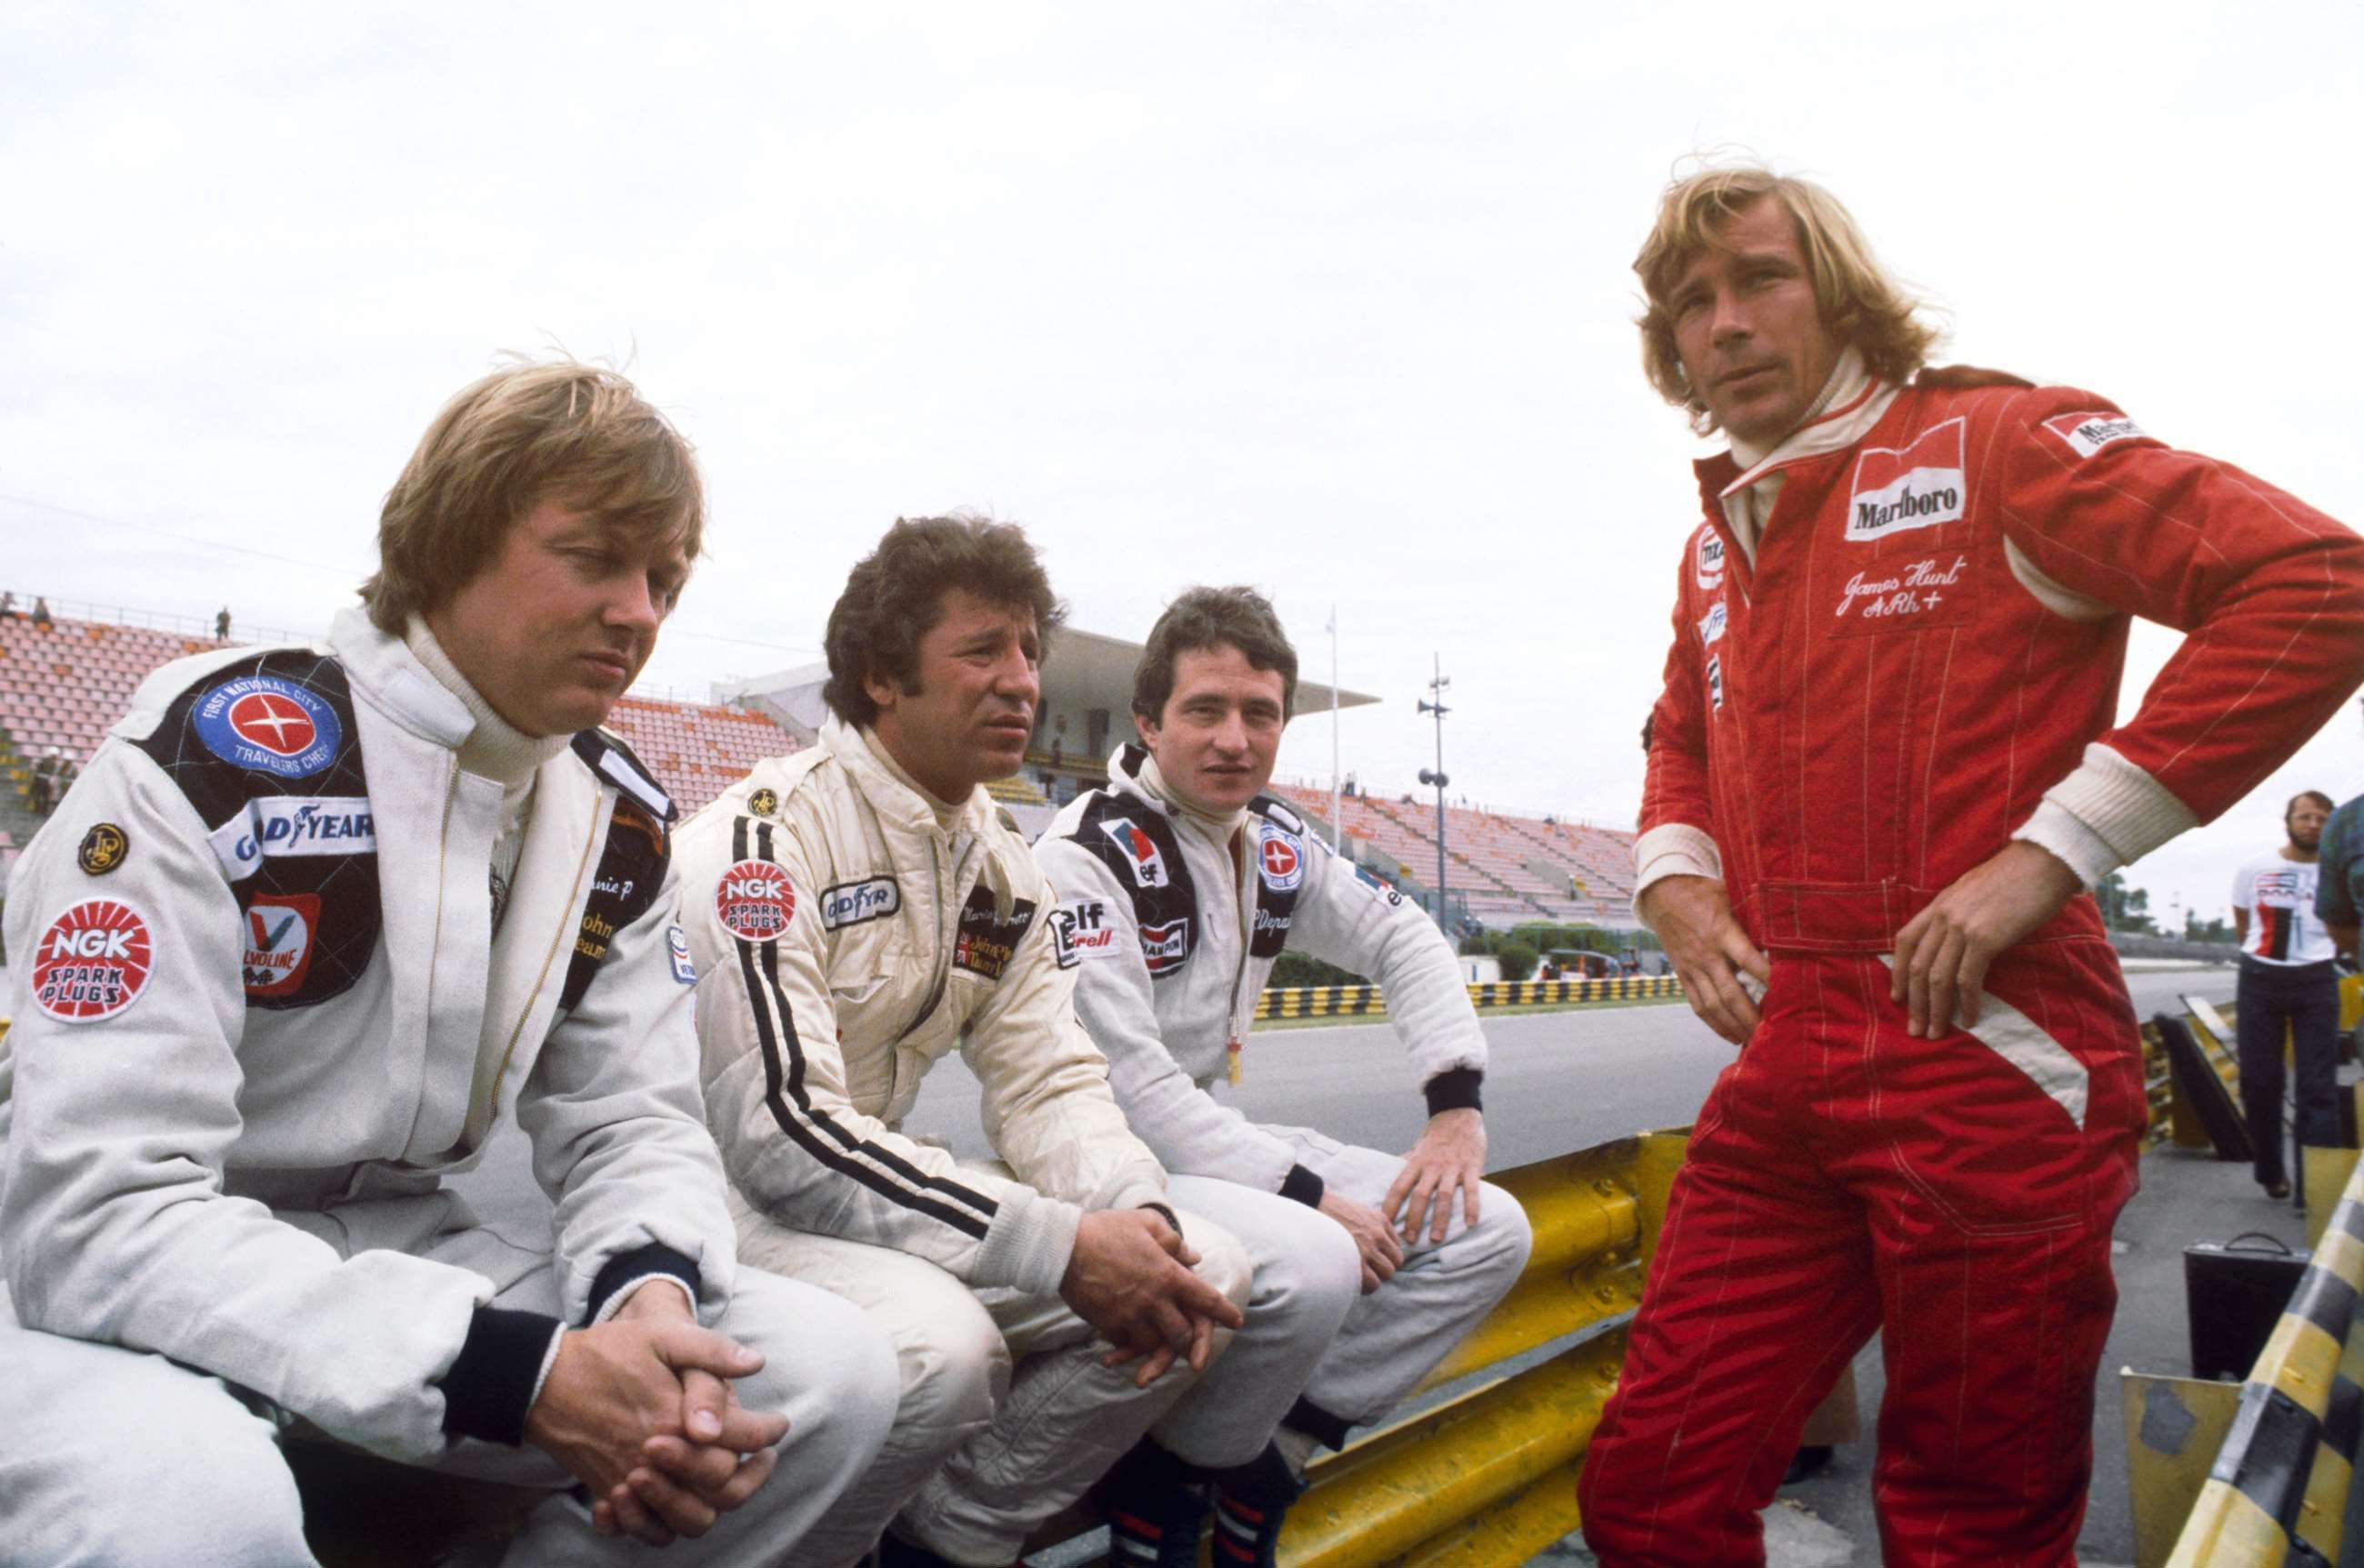 Argentina, 1978. Left to right: Ronnie Peterson, Mario Andretti, Patrick Depailler, James Hunt.